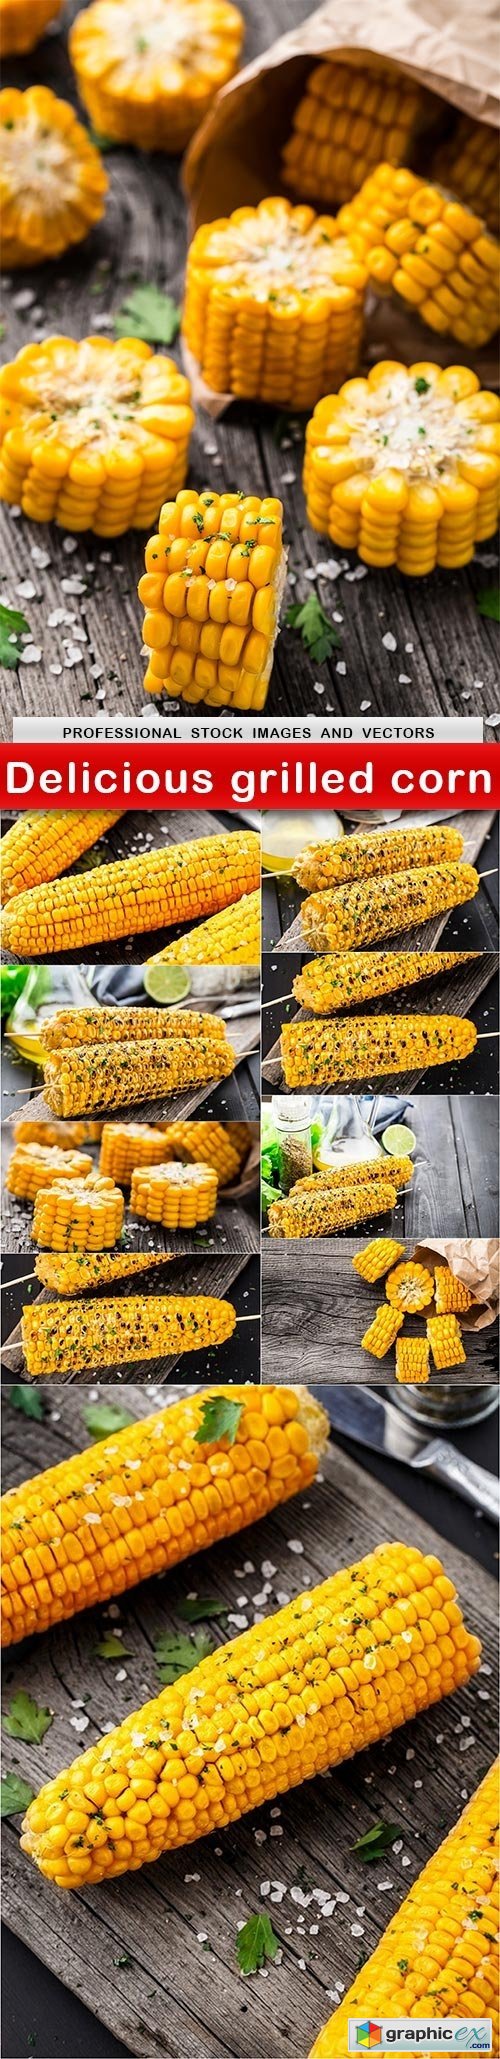 Delicious grilled corn - 10 UHQ JPEG